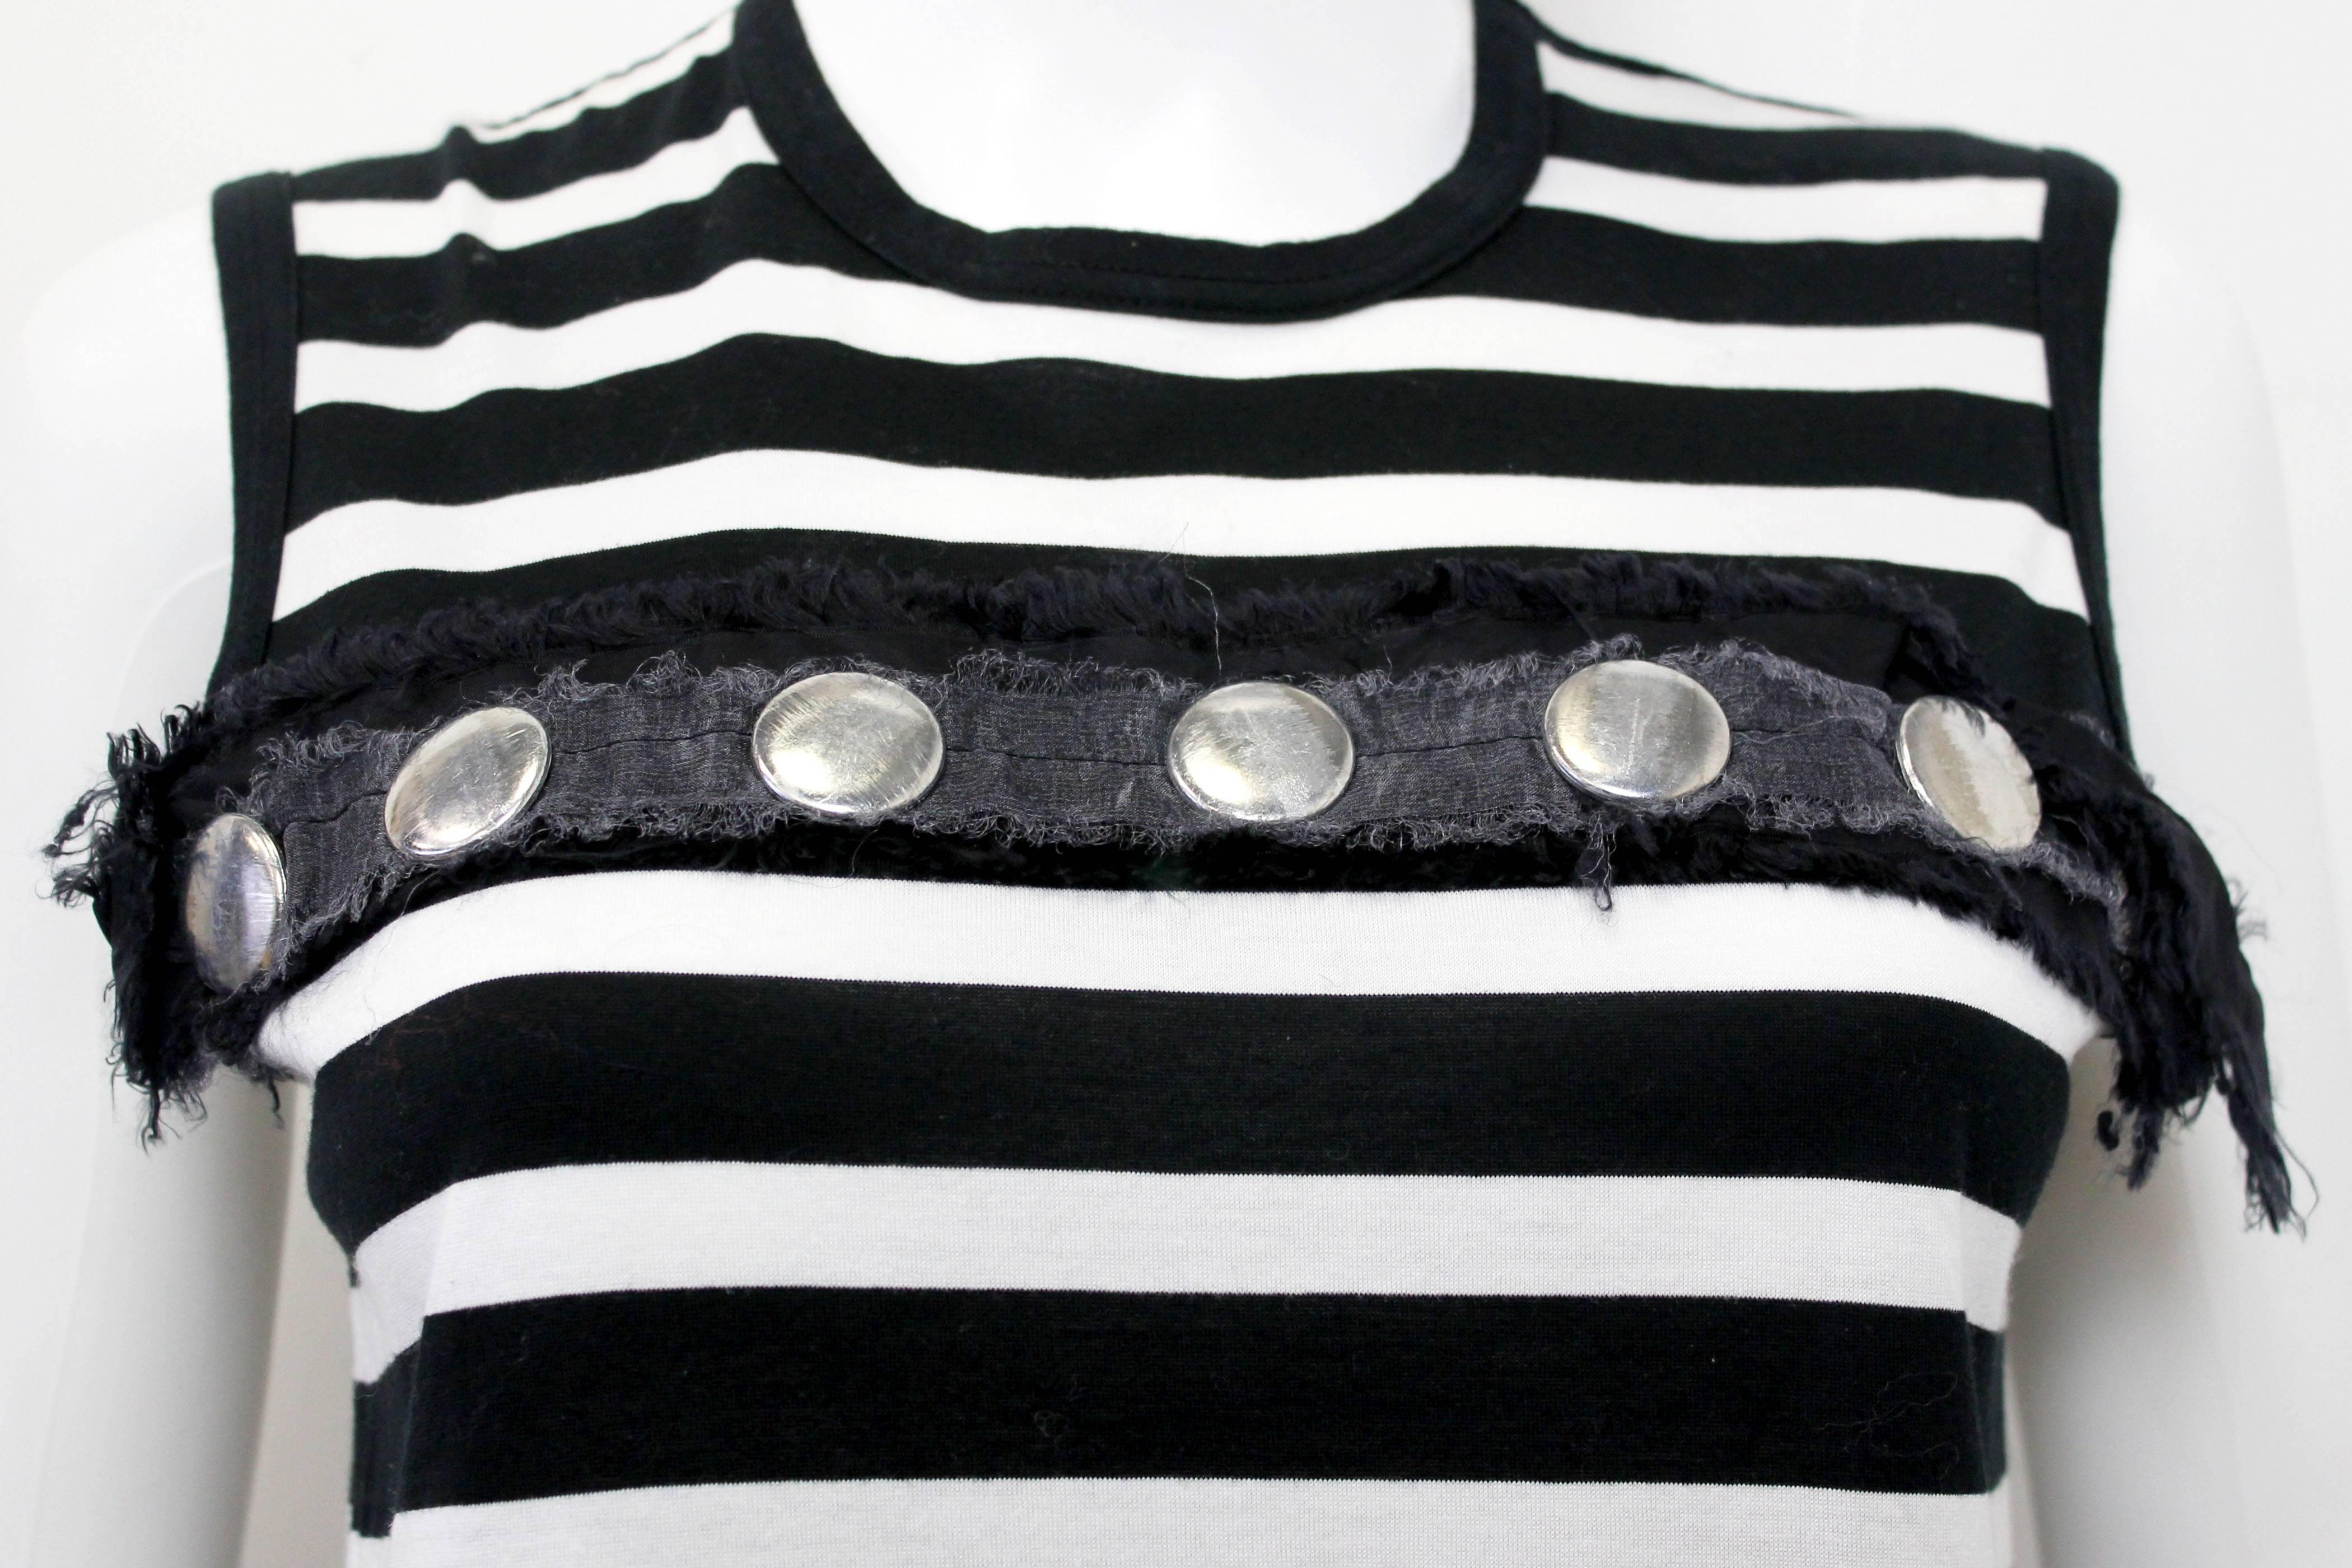 This Comme Des Garcons vest is from the Tricot line. The vest is made from a horizontal striped jersey cotton.
The vest is also embellished with a raw edged fabric and then studded with silver circular distressed button like studs.
